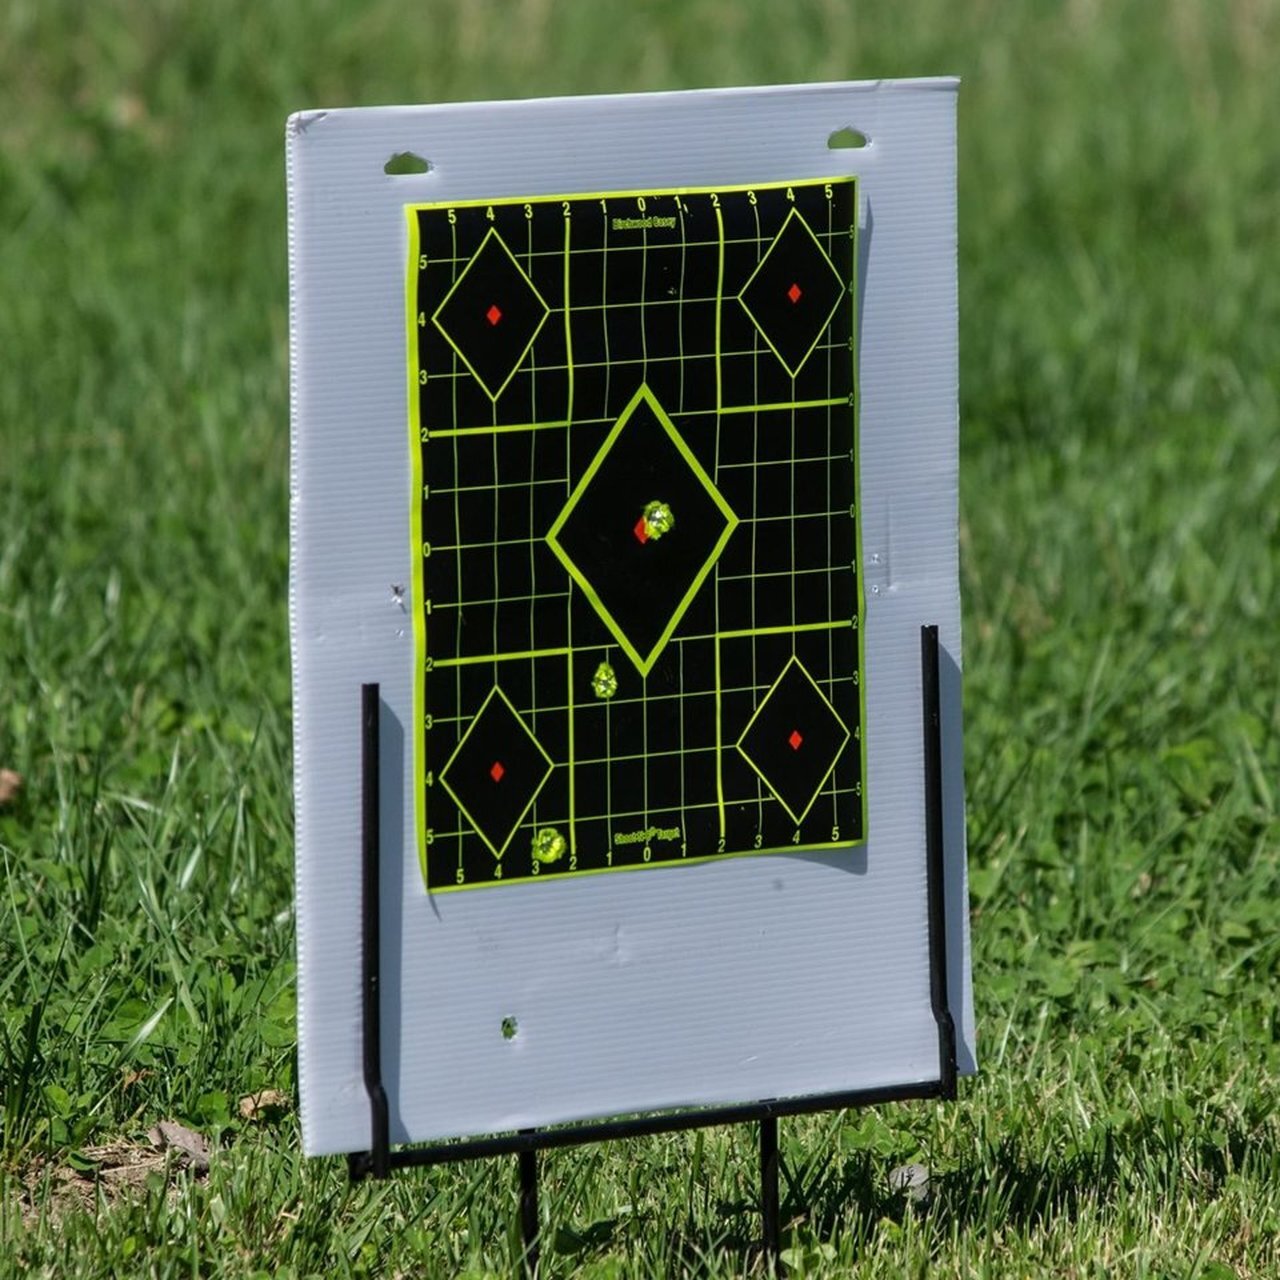 Birchwood Casey Shoot-N-C Sight-In Paper Reactive Shooting Targets - 15 Targets 36 Pasters 8 Inch #34112